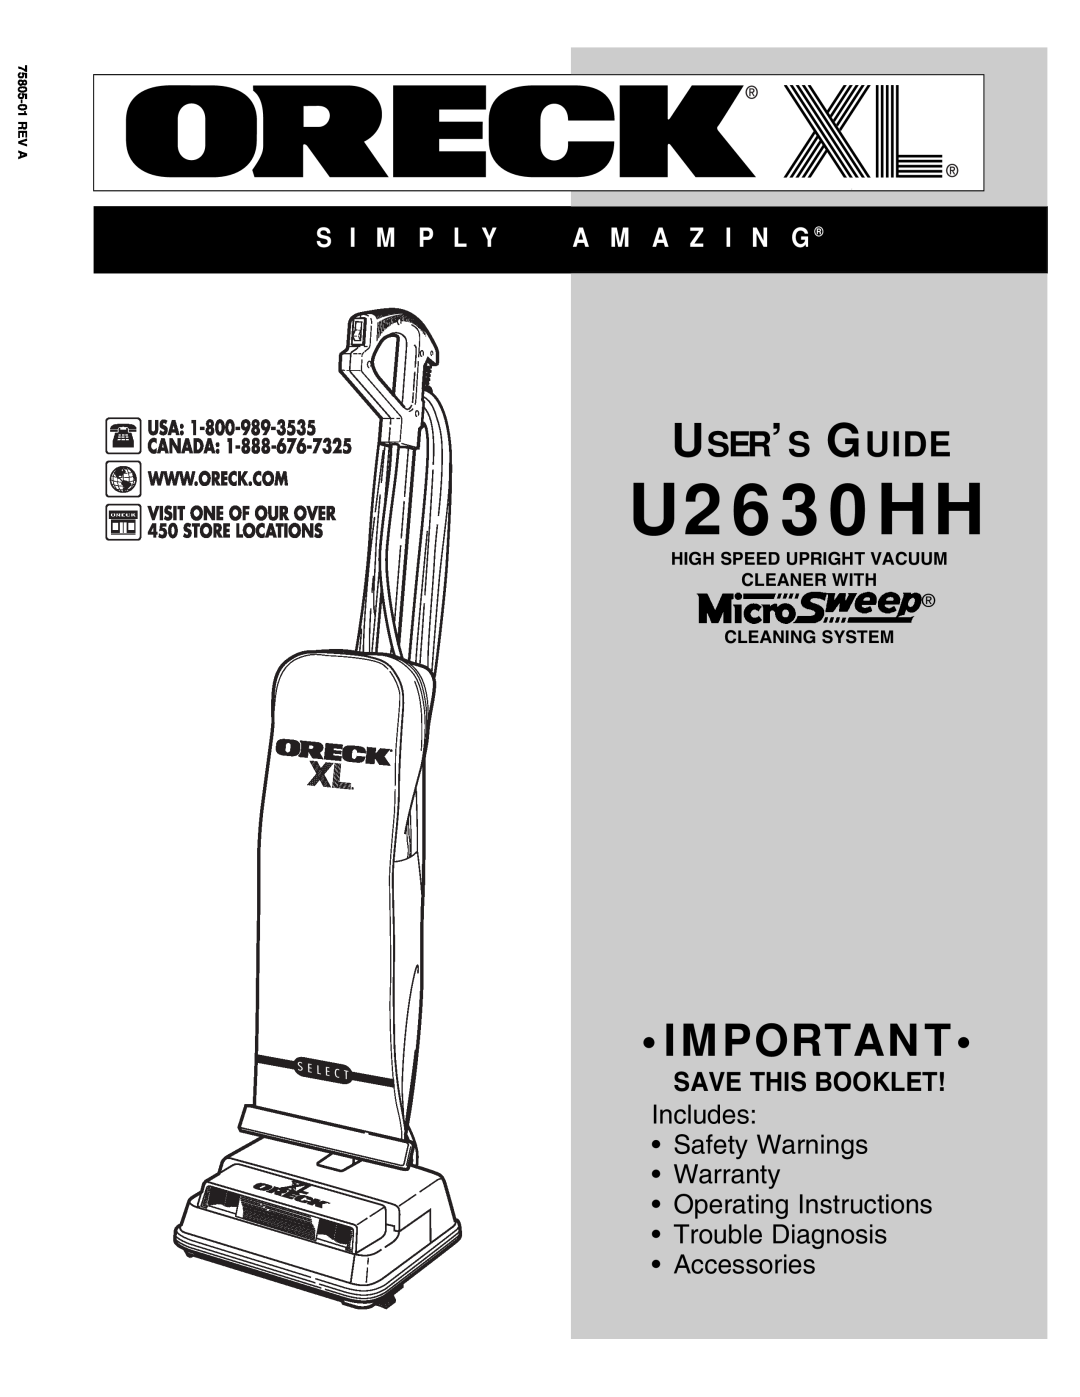 Oreck U2630HH warranty User’S Guide, S I M P L Y, A M A Z I N G, Save This Booklet, Includes Safety Warnings Warranty 